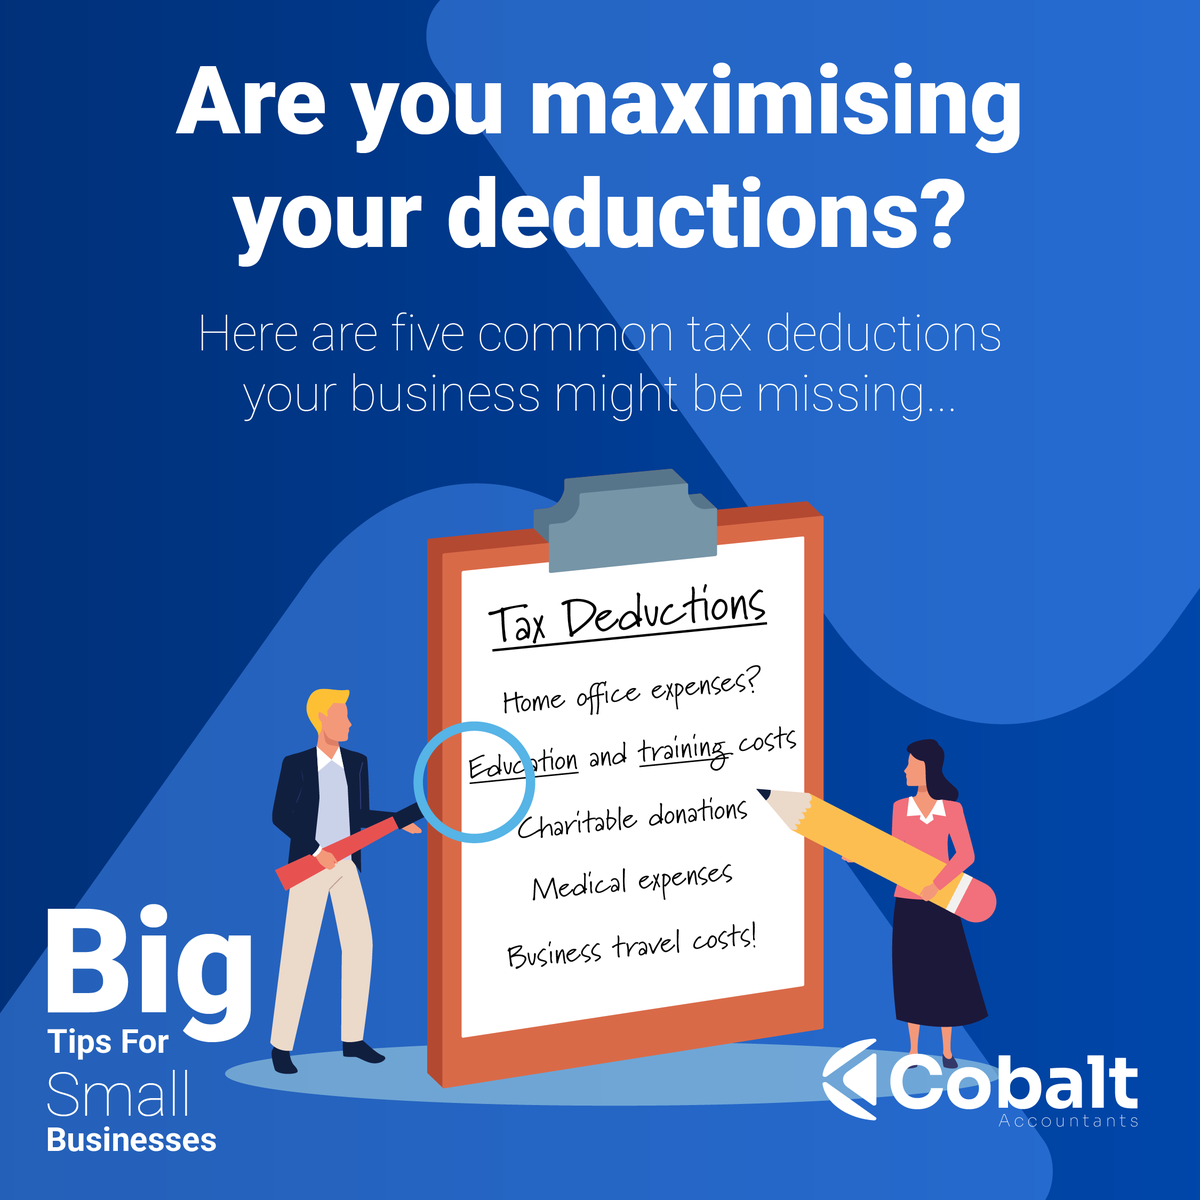 💡 #ThursdayTaxTips💡
Are you maximising your #Deductions? 
Here are five common #TaxDeductions you might be missing:

1️⃣ Home office expenses 🏠
2️⃣ Education and training costs 📚
3️⃣ Charitable donations 💌
4️⃣ Medical expenses 🏥
5️⃣ Business travel costs ✈️